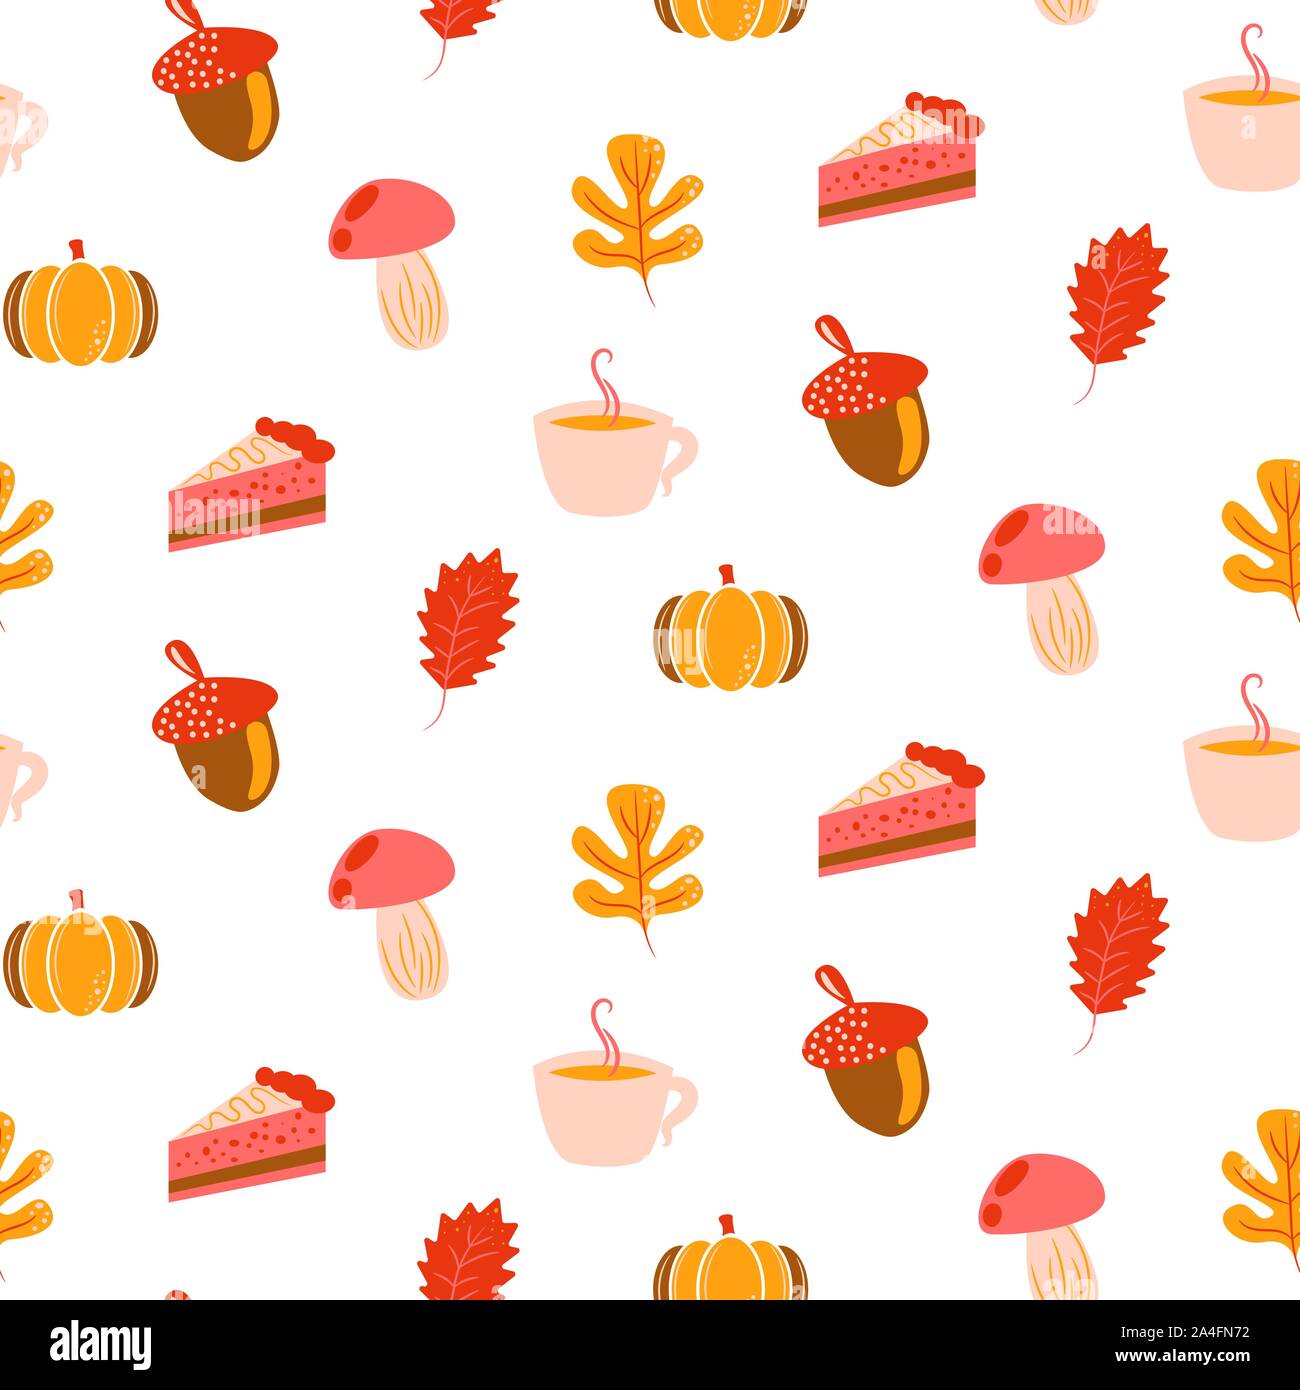 Autumn harvest objects pumpkin, acorn, pie, mushroom and leaves. Fall seamless pattern in pink and orange colors. Stock Vector